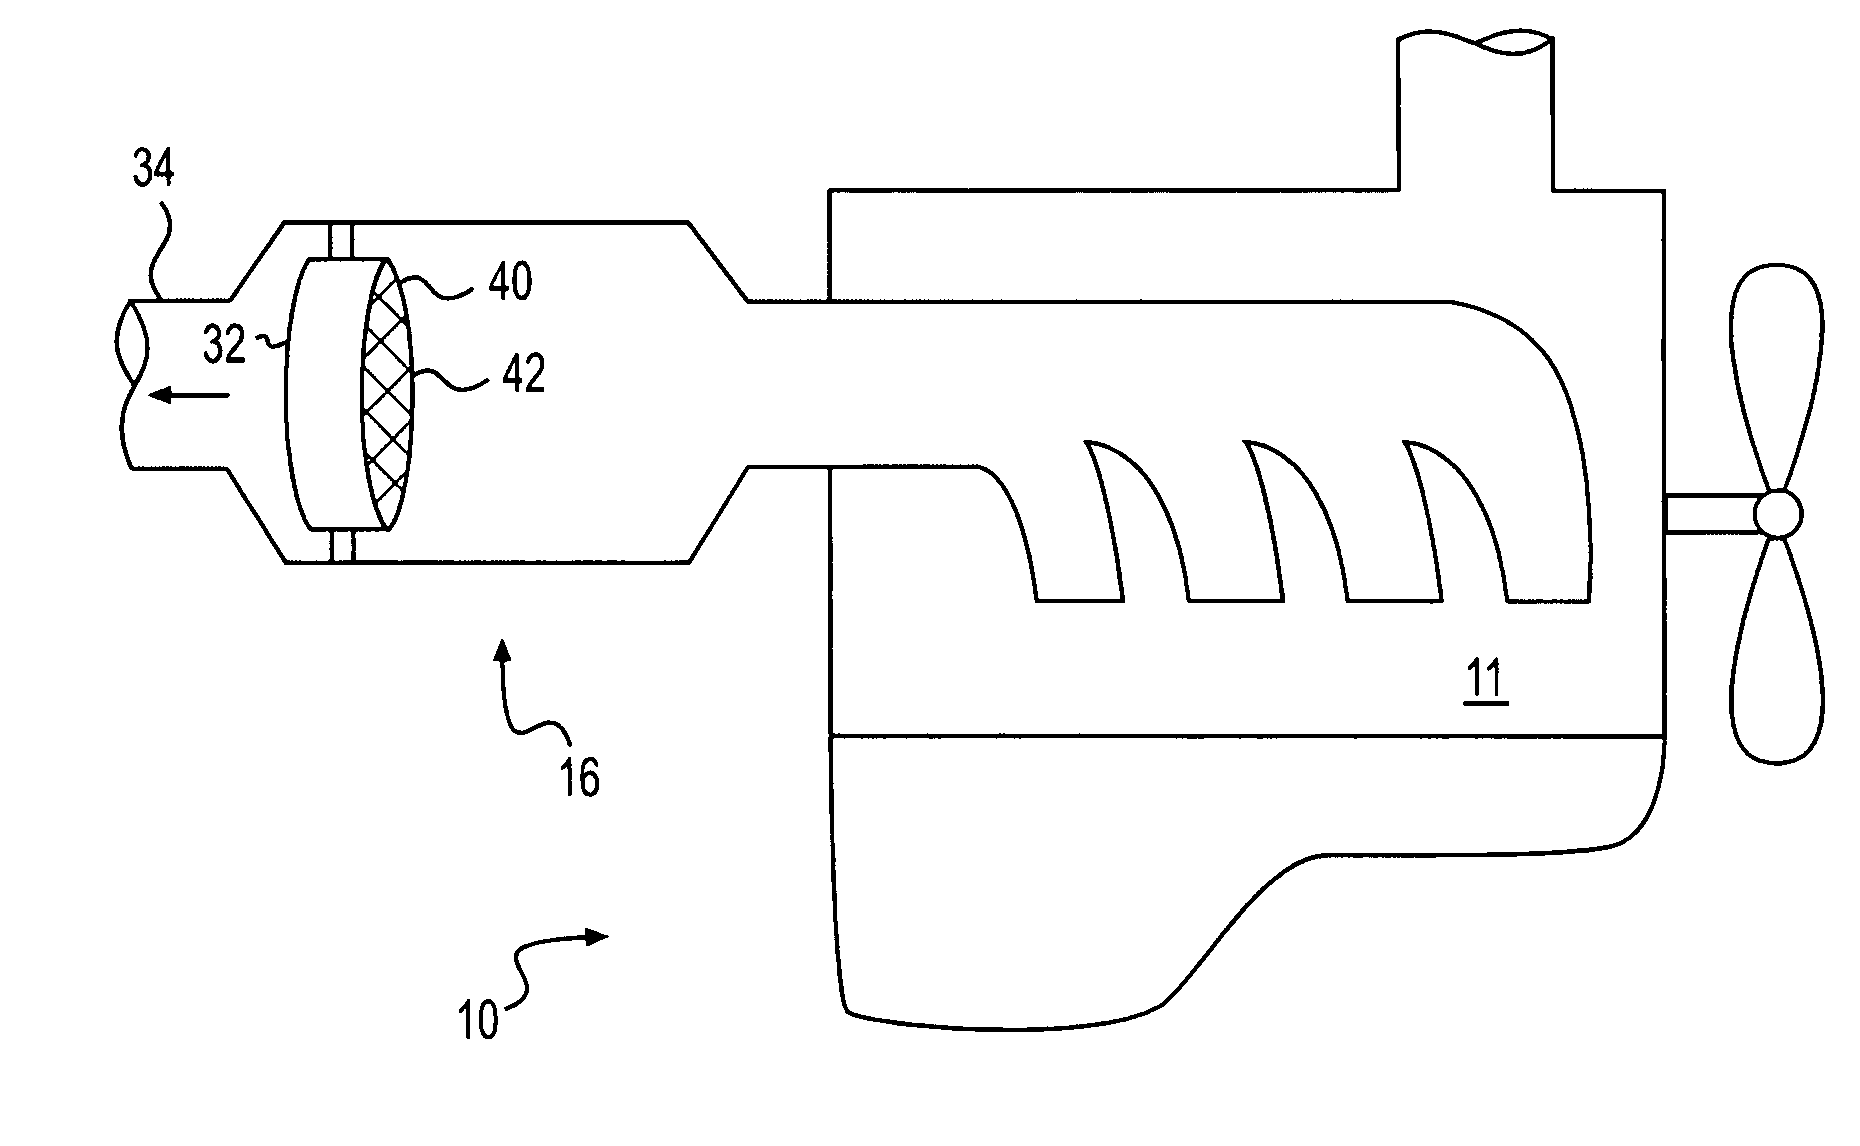 Exhaust system having a gold-platinum group metal catalyst